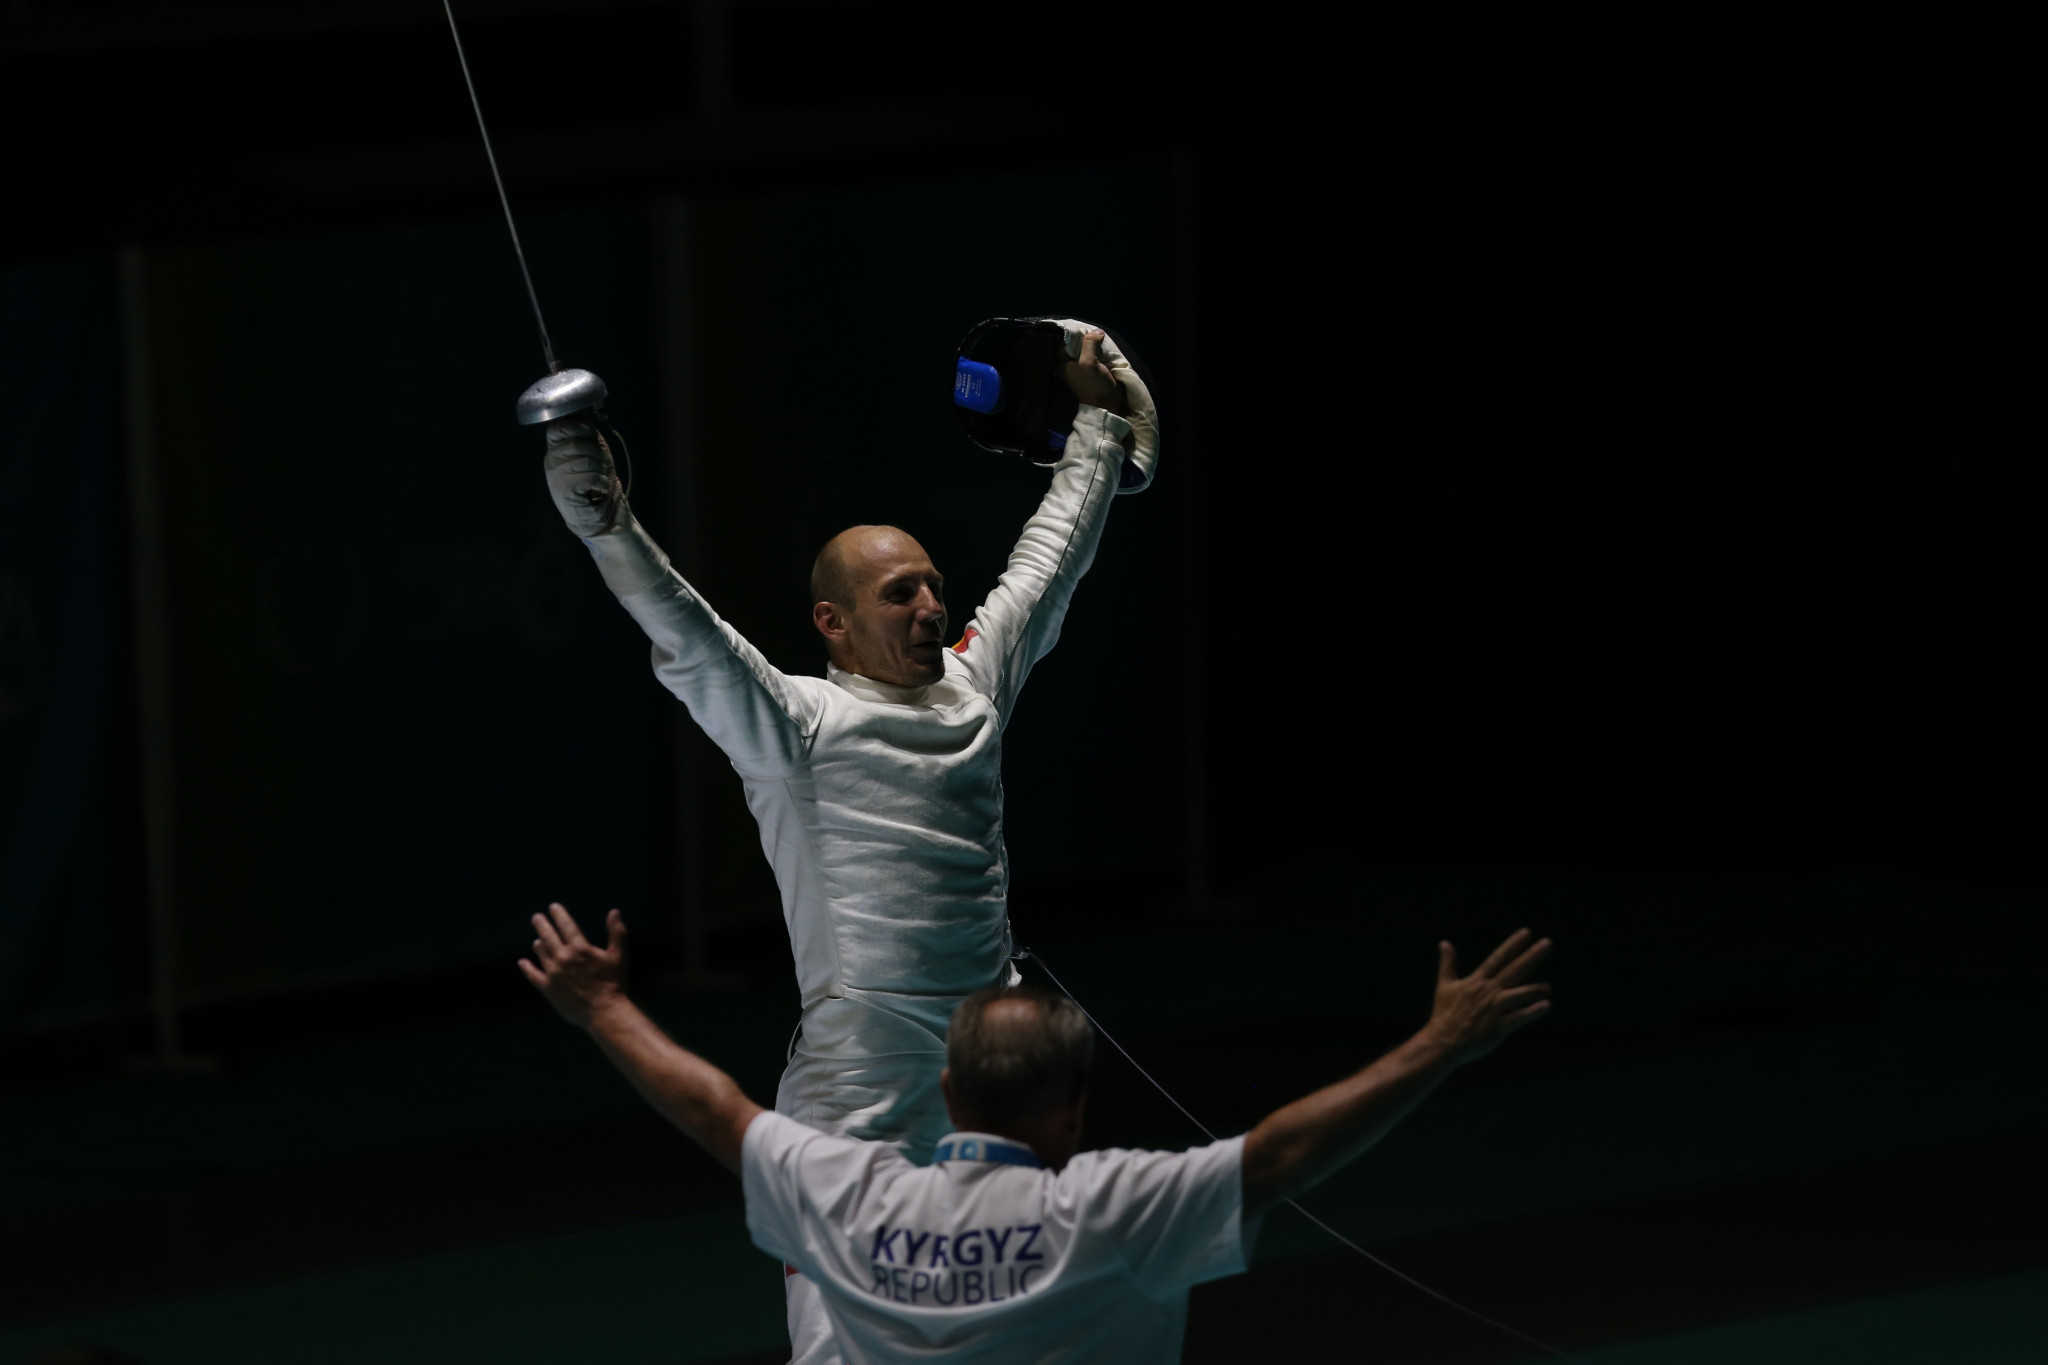 There was delight for Kyrgyzstan as Roman Petrov captured the men’s épée individual crown ©Konya 2021